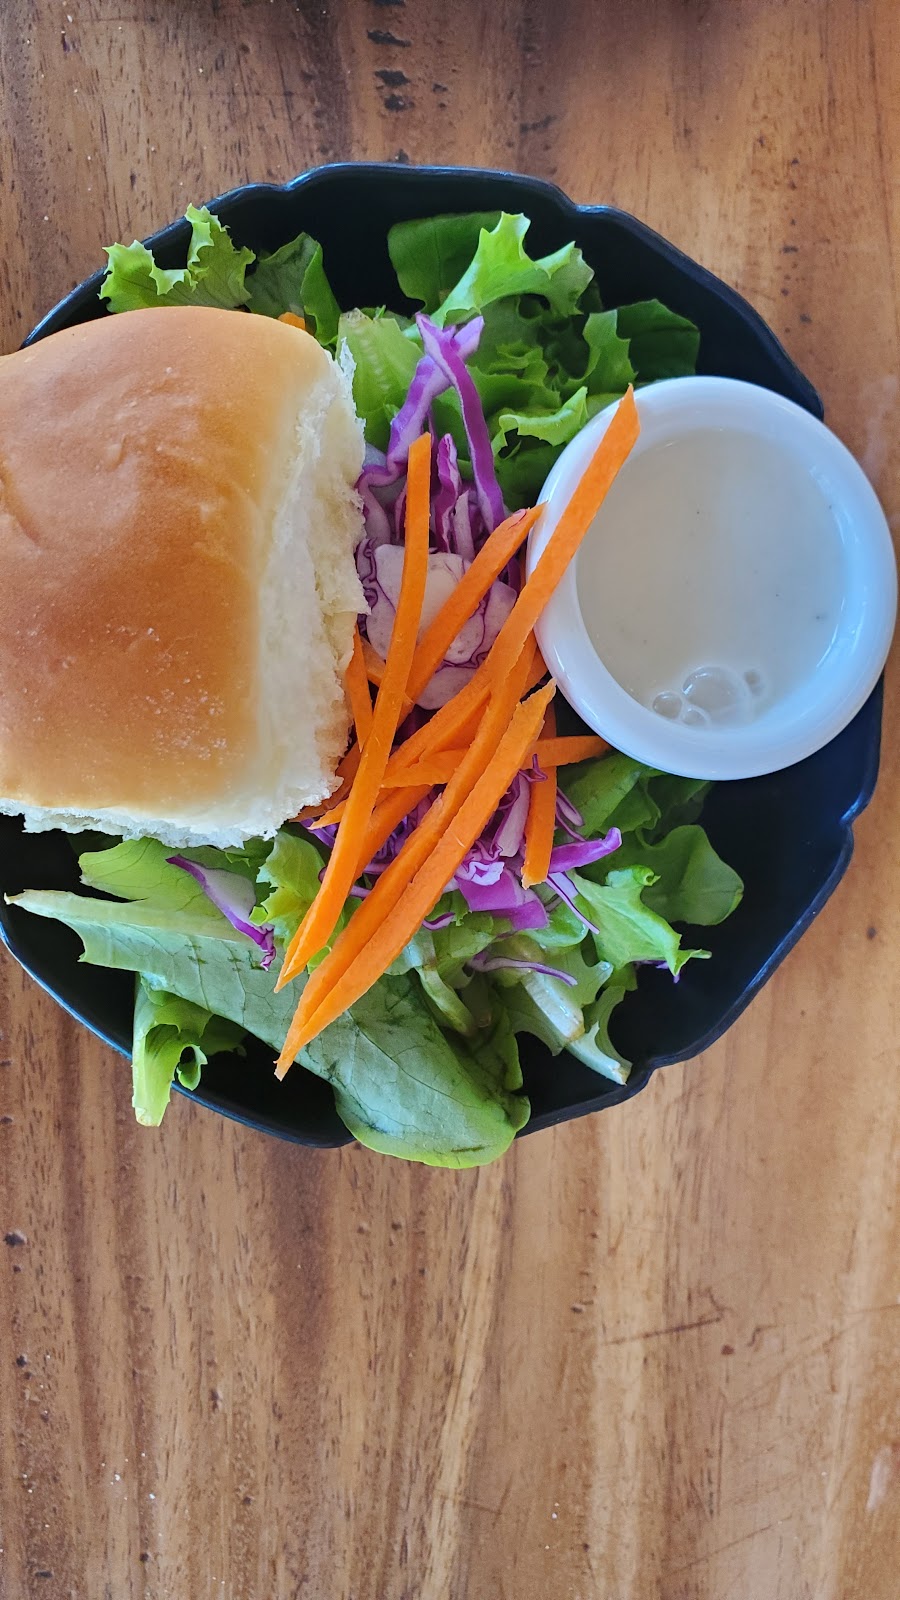 Image of a bowl of salad with a roll.